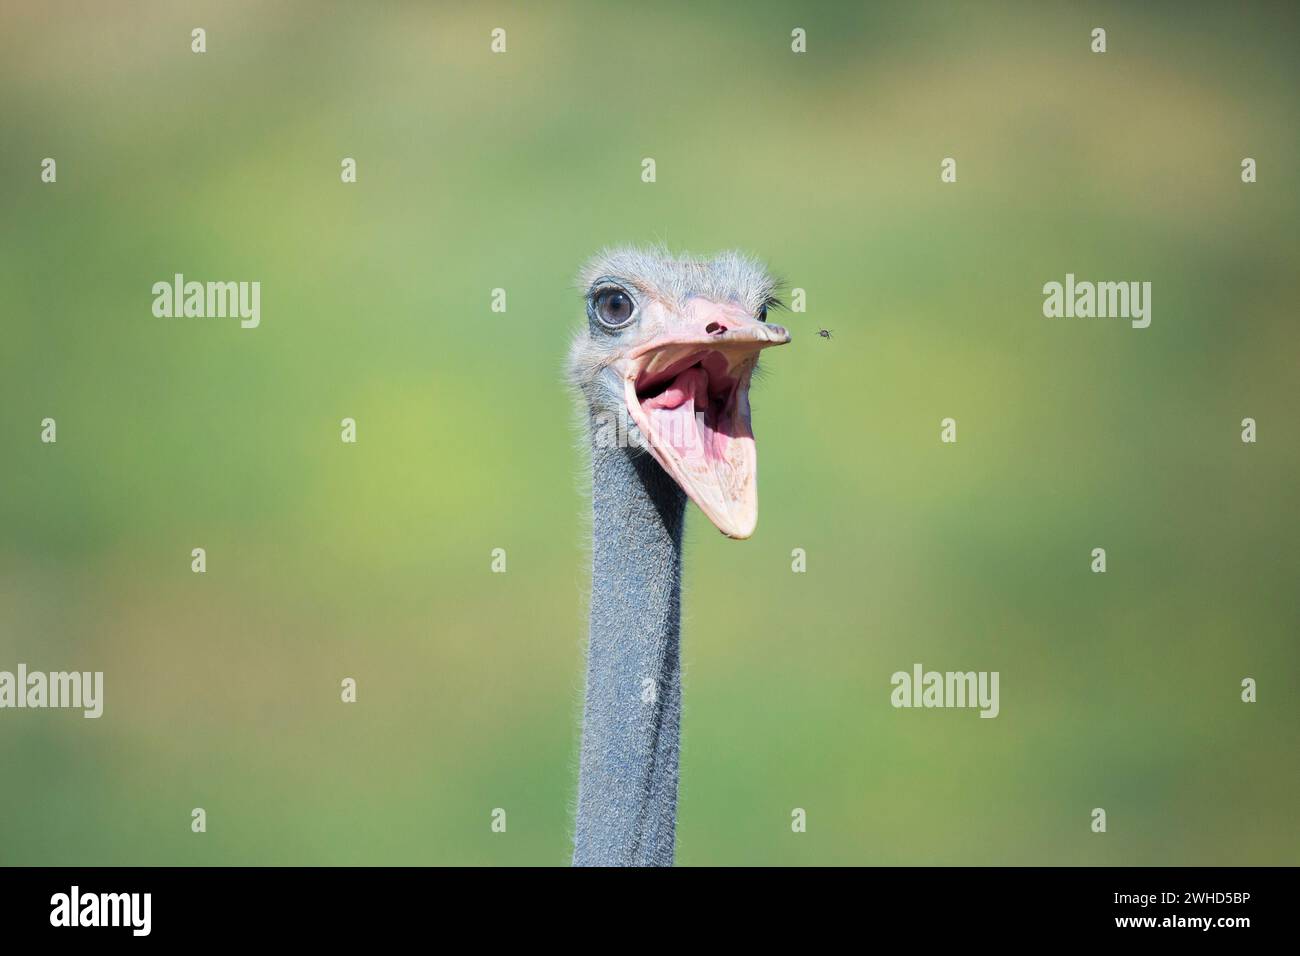 Africa, animal Head, bird, close-up, daytime, Eye, green background, Humour, nature, no people, Northern Cape Province, Ostrich (Struthio camelus), South Africa, wildlife, bush, tourism, safari, National Park, front view, animals in the wild, Yawning, Surprise Stock Photo